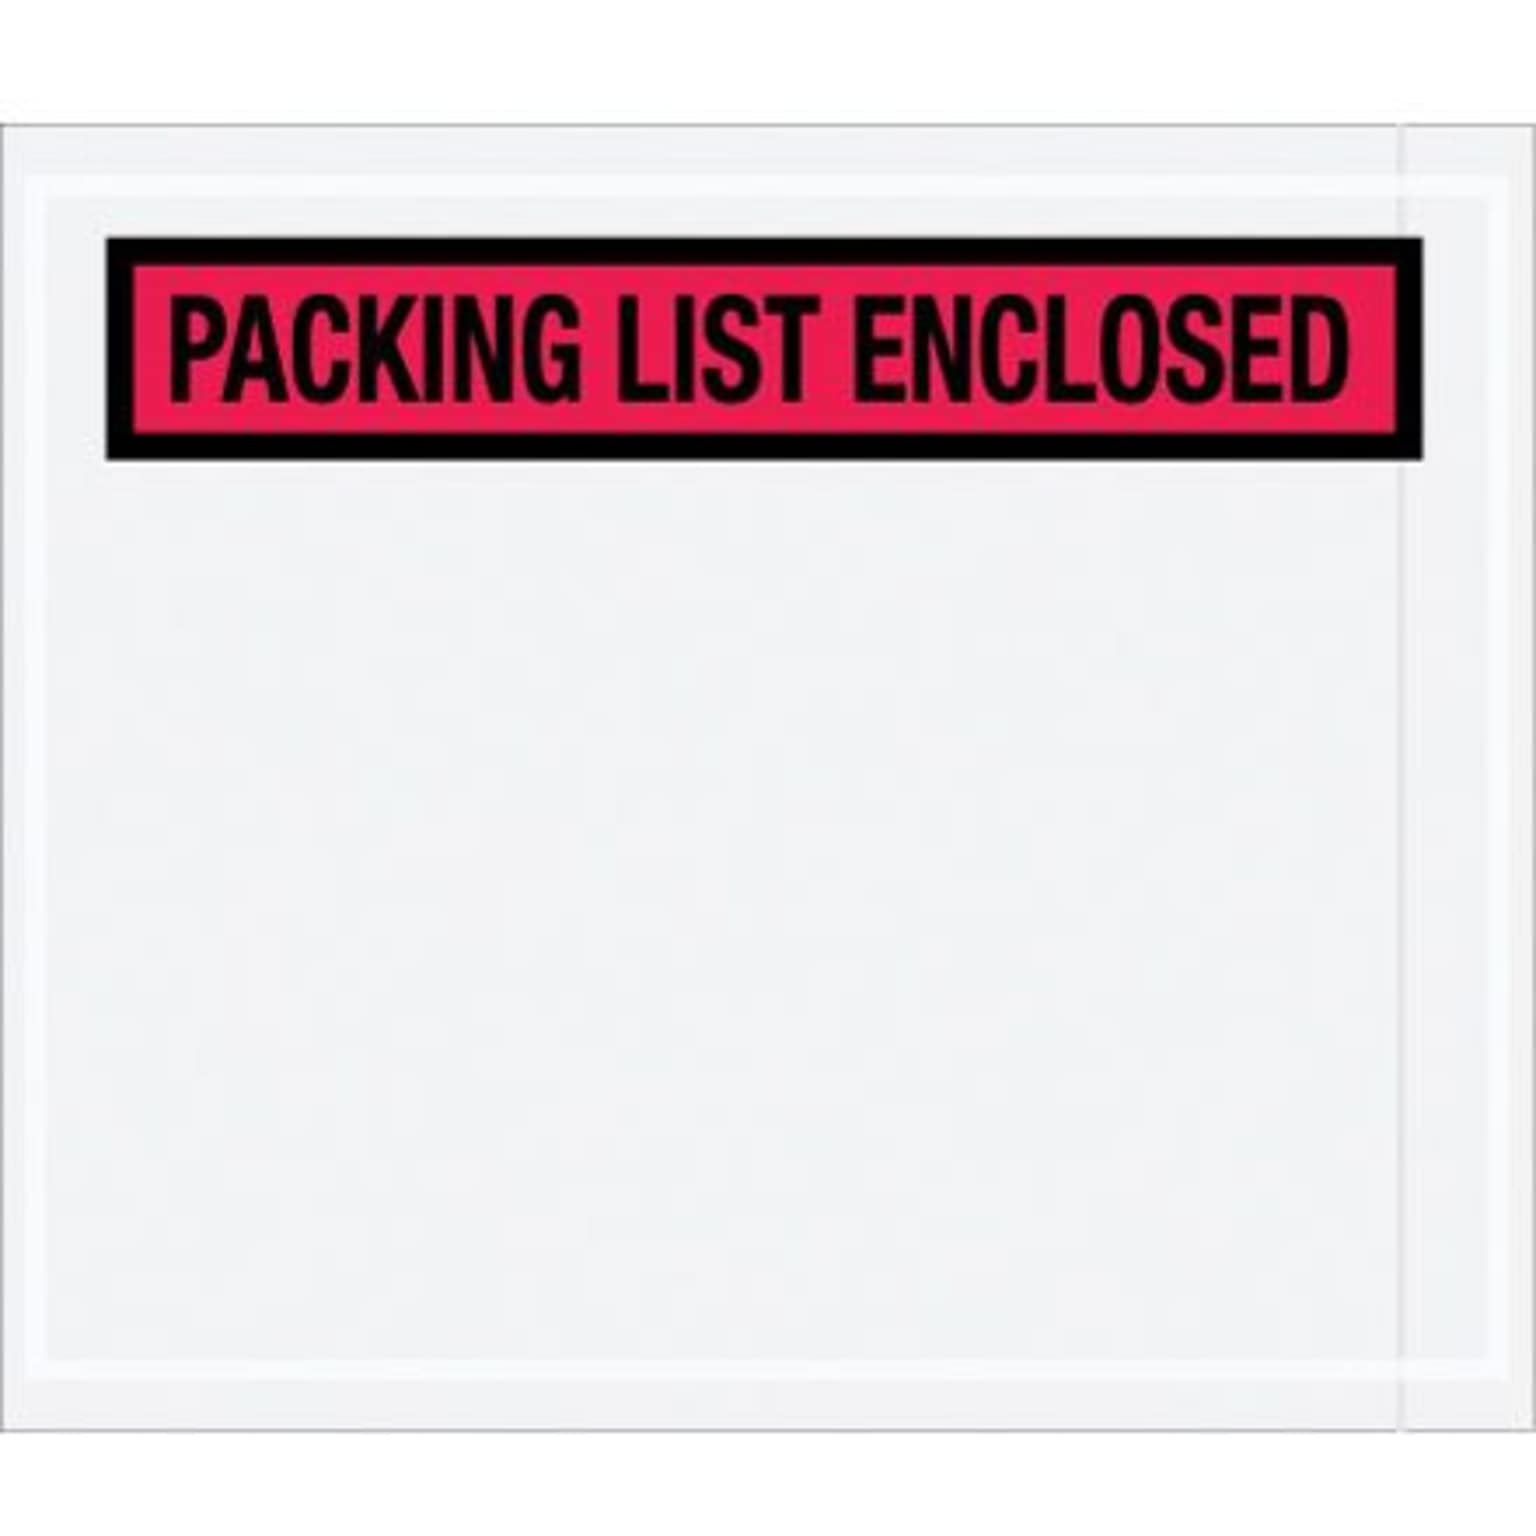 Quill Brand Packing List Envelope, 7 x 6, Red Panel Face, Packing List Enclosed, 1000/Case (PL491)